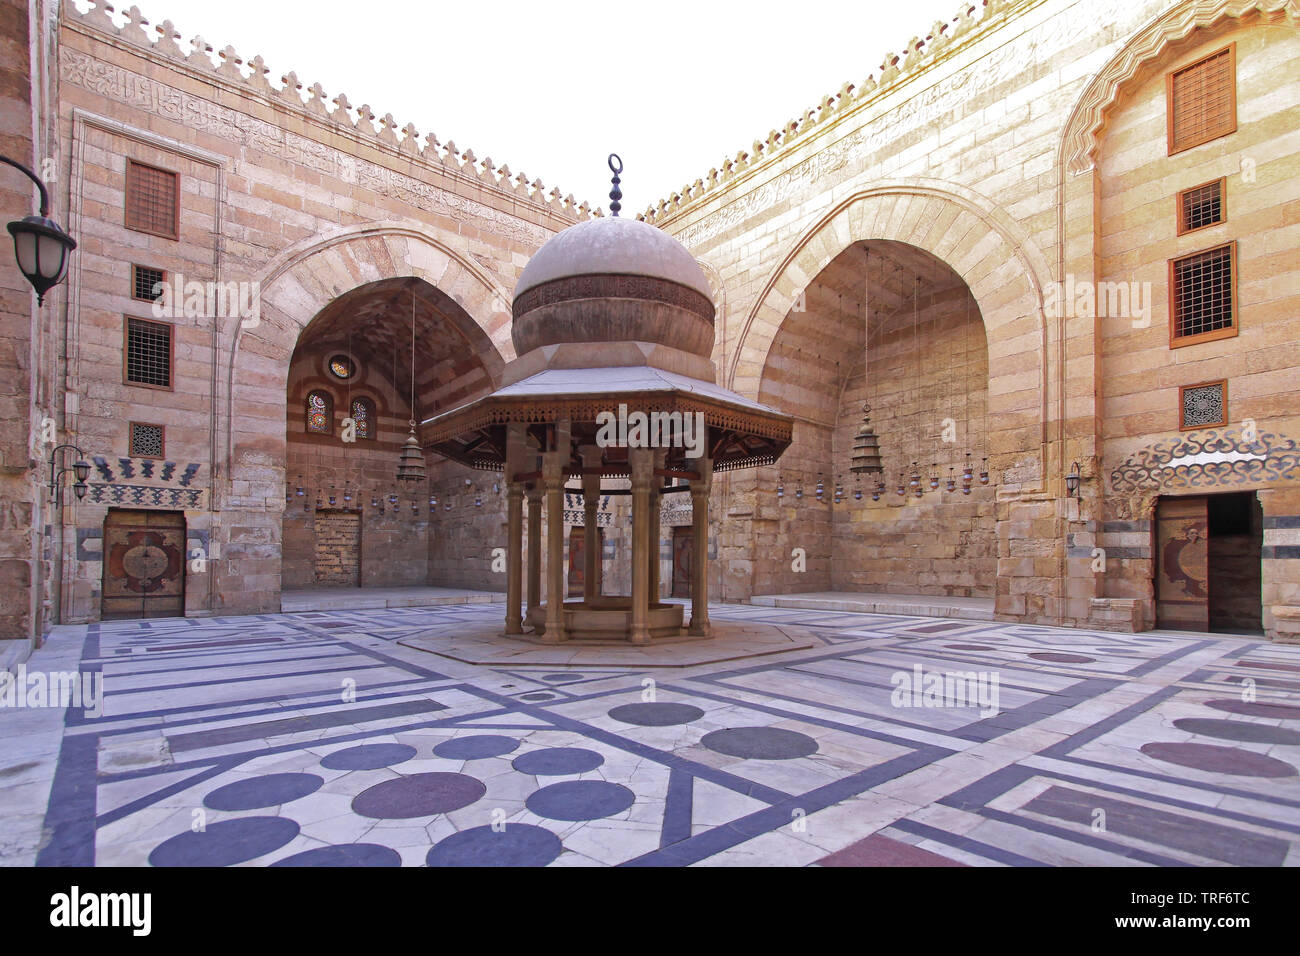 Cairo, Egypt - March 01, 2010: Ablutions Fountain in Courtyard of Sultan Barquq Mosque at Qalawun Complex in Cairo, Egypt. Stock Photo